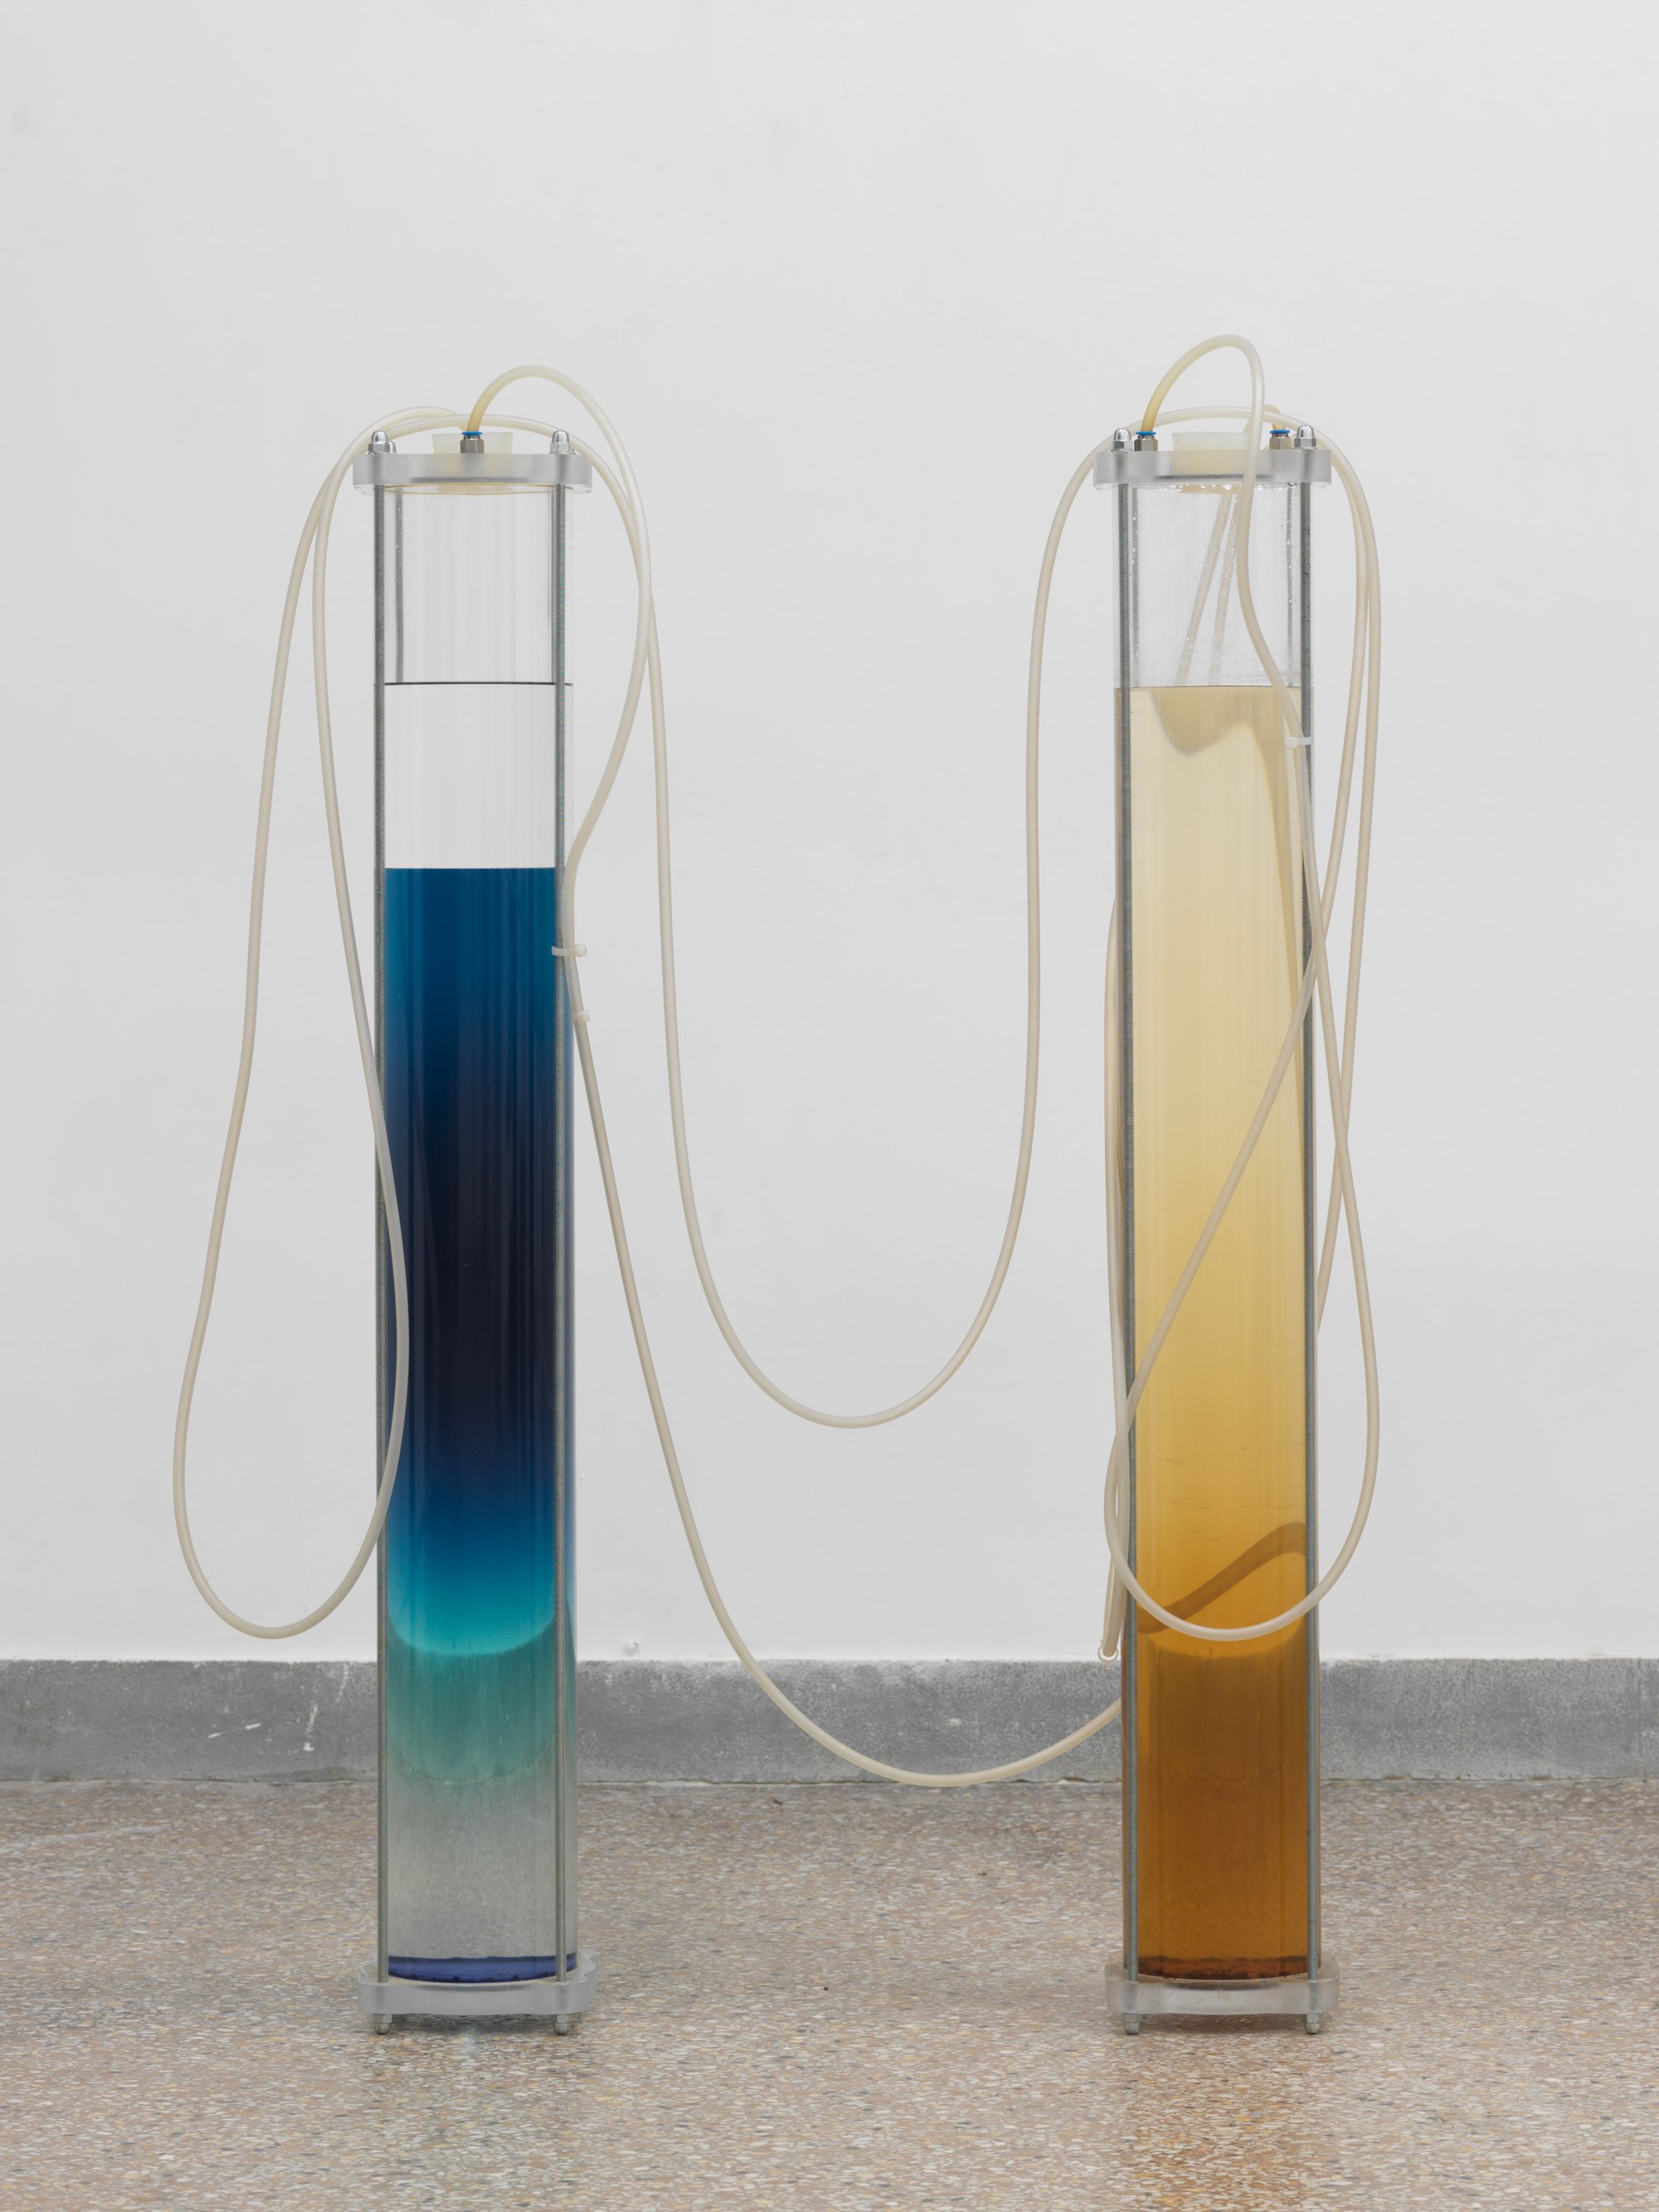 Iris Touliatou, Exhausted Lovers, separated ink and paper extracts, water, glycerine, ethyl alcohol, perspex, steel, silicon tubes, pumps, 11 lt, 110 x 15 x 15 cm each (43 1/4 x 5 7/8 x 5 7/8 in each), 2016. Installation view, The Way In, Haus N Athen, Athens, 2021